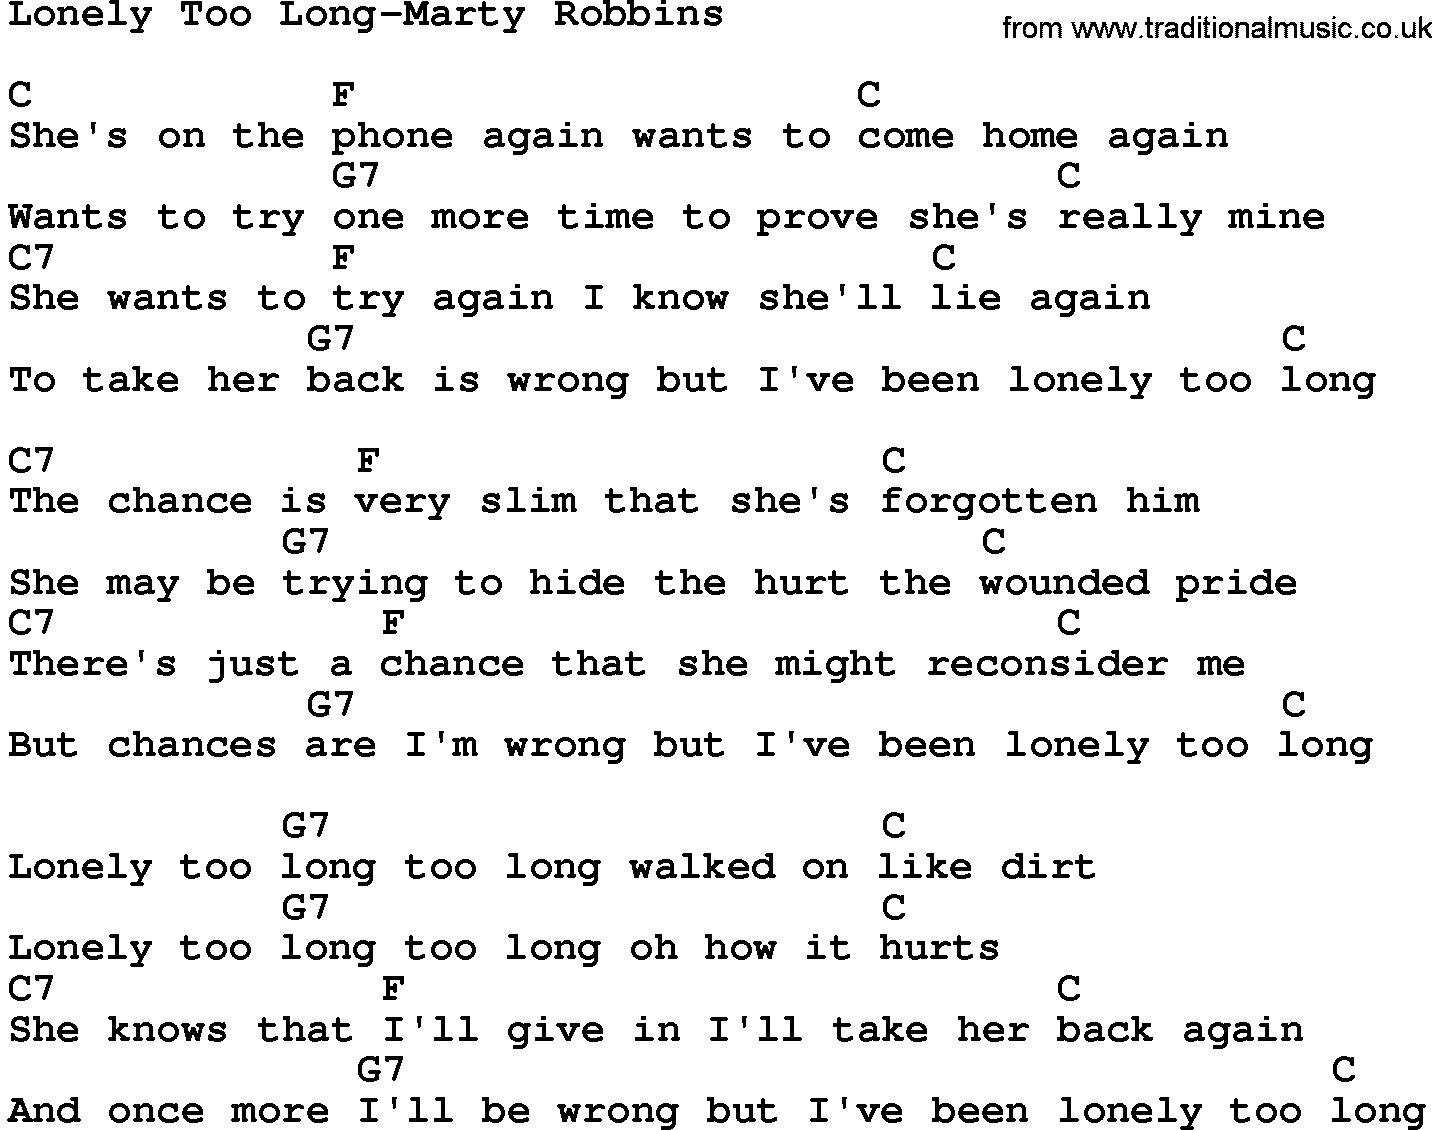 Country music song: Lonely Too Long-Marty Robbins lyrics and chords